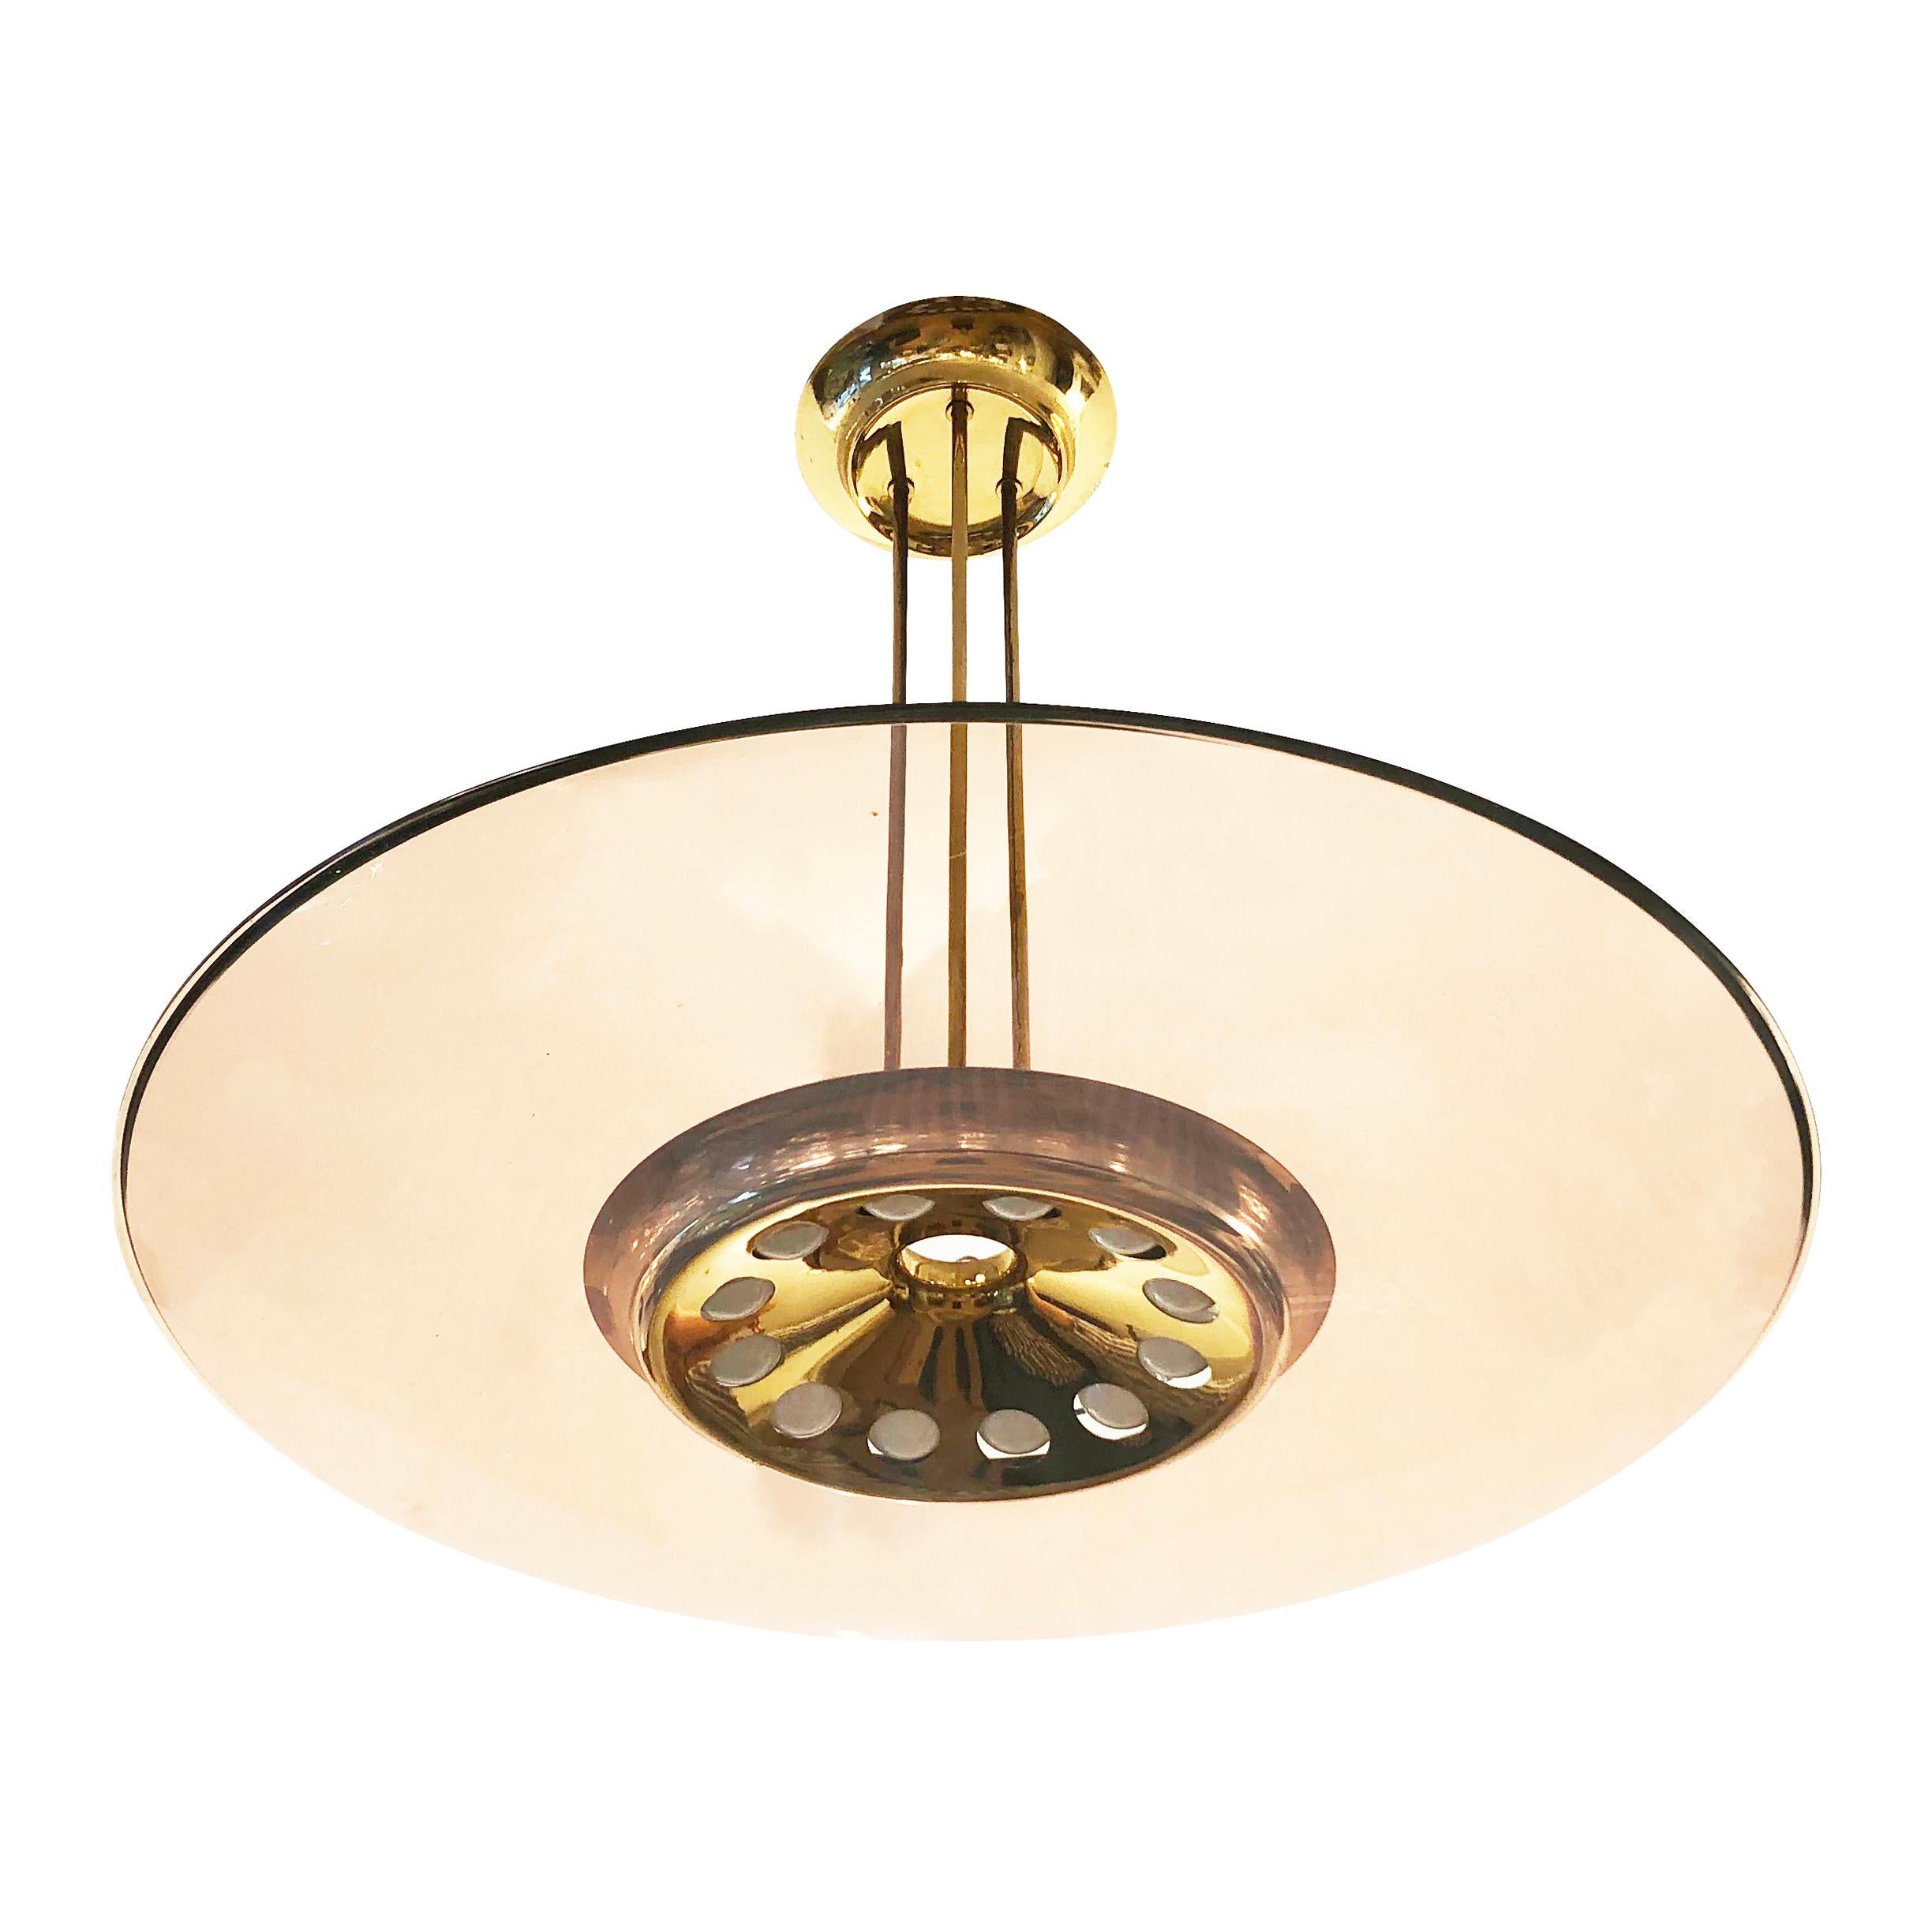 Mid-Century Modern Fontana Arte Ceiling Light Model 1508 by Max Ingrand, 2 Available